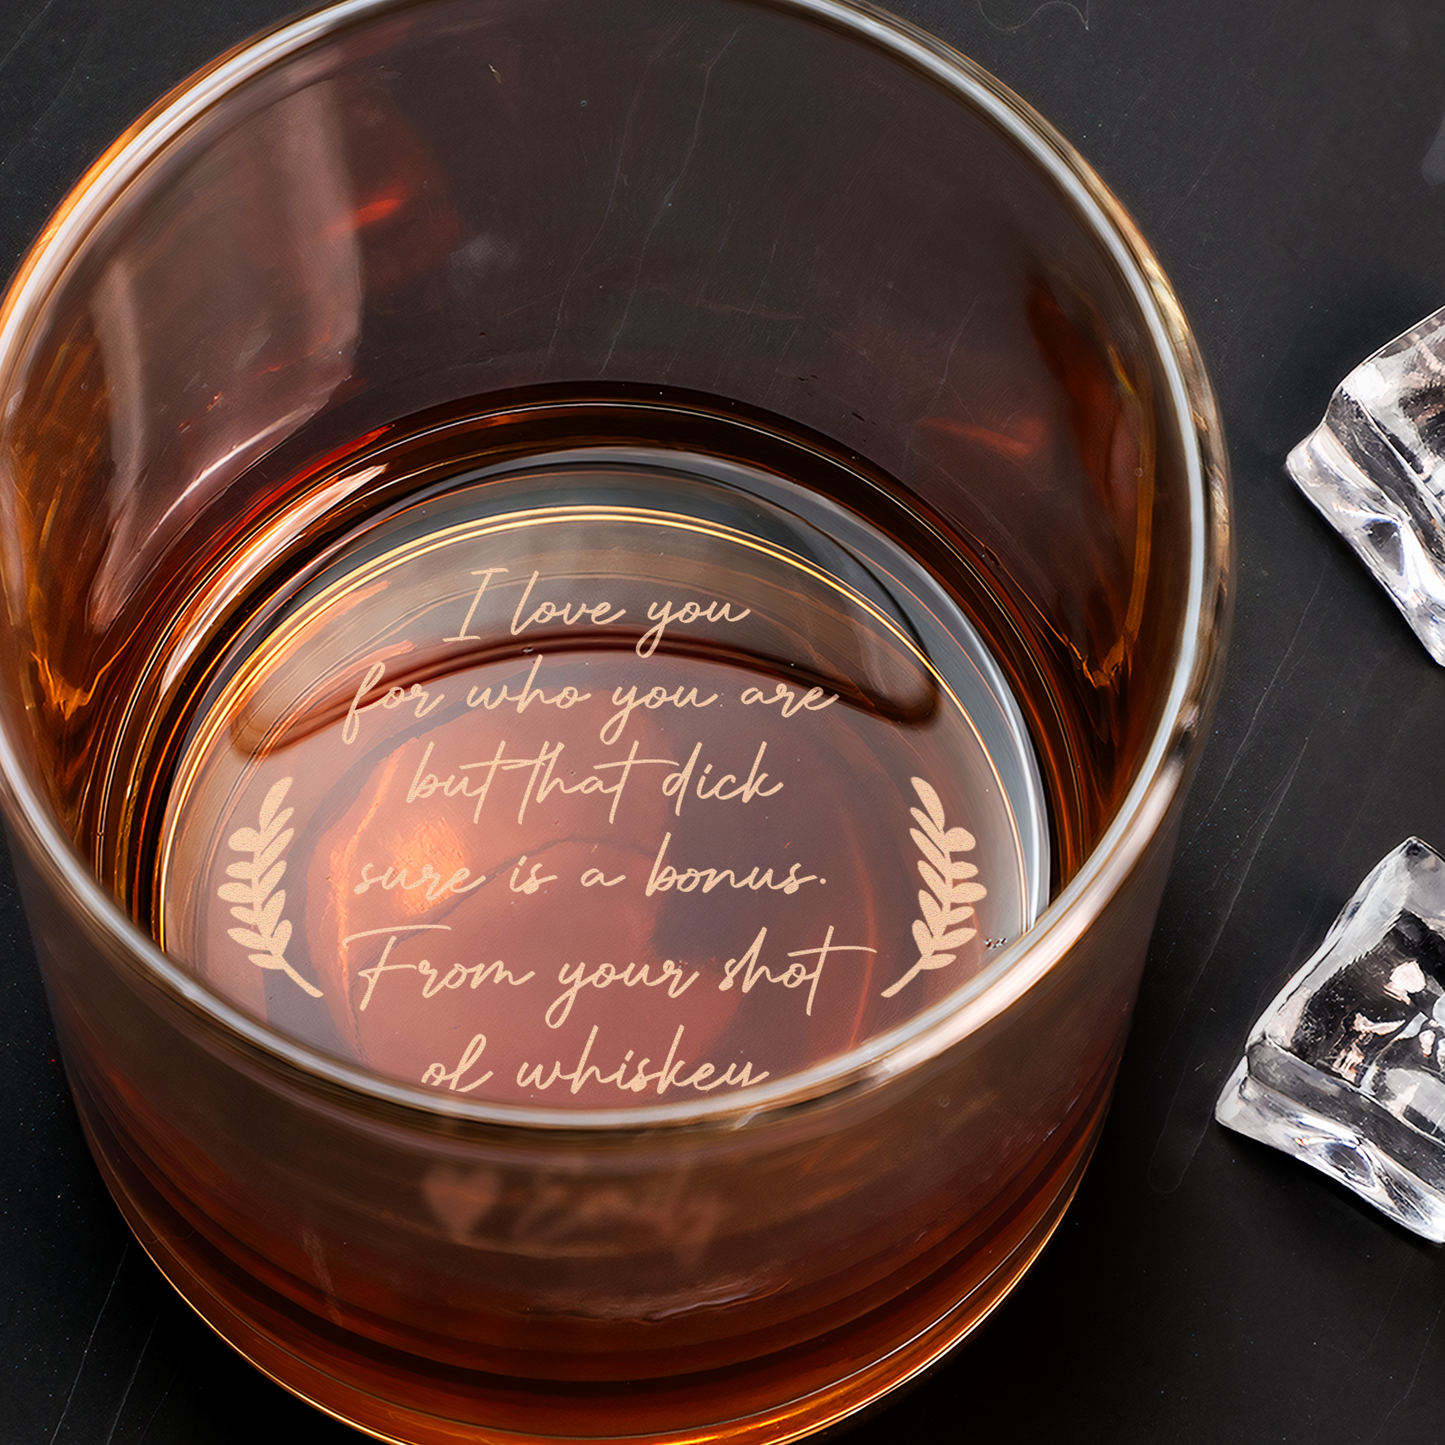 I Love You For Who You Are But That Sure Is A Bonus - Personalized Engraved Whiskey Glass